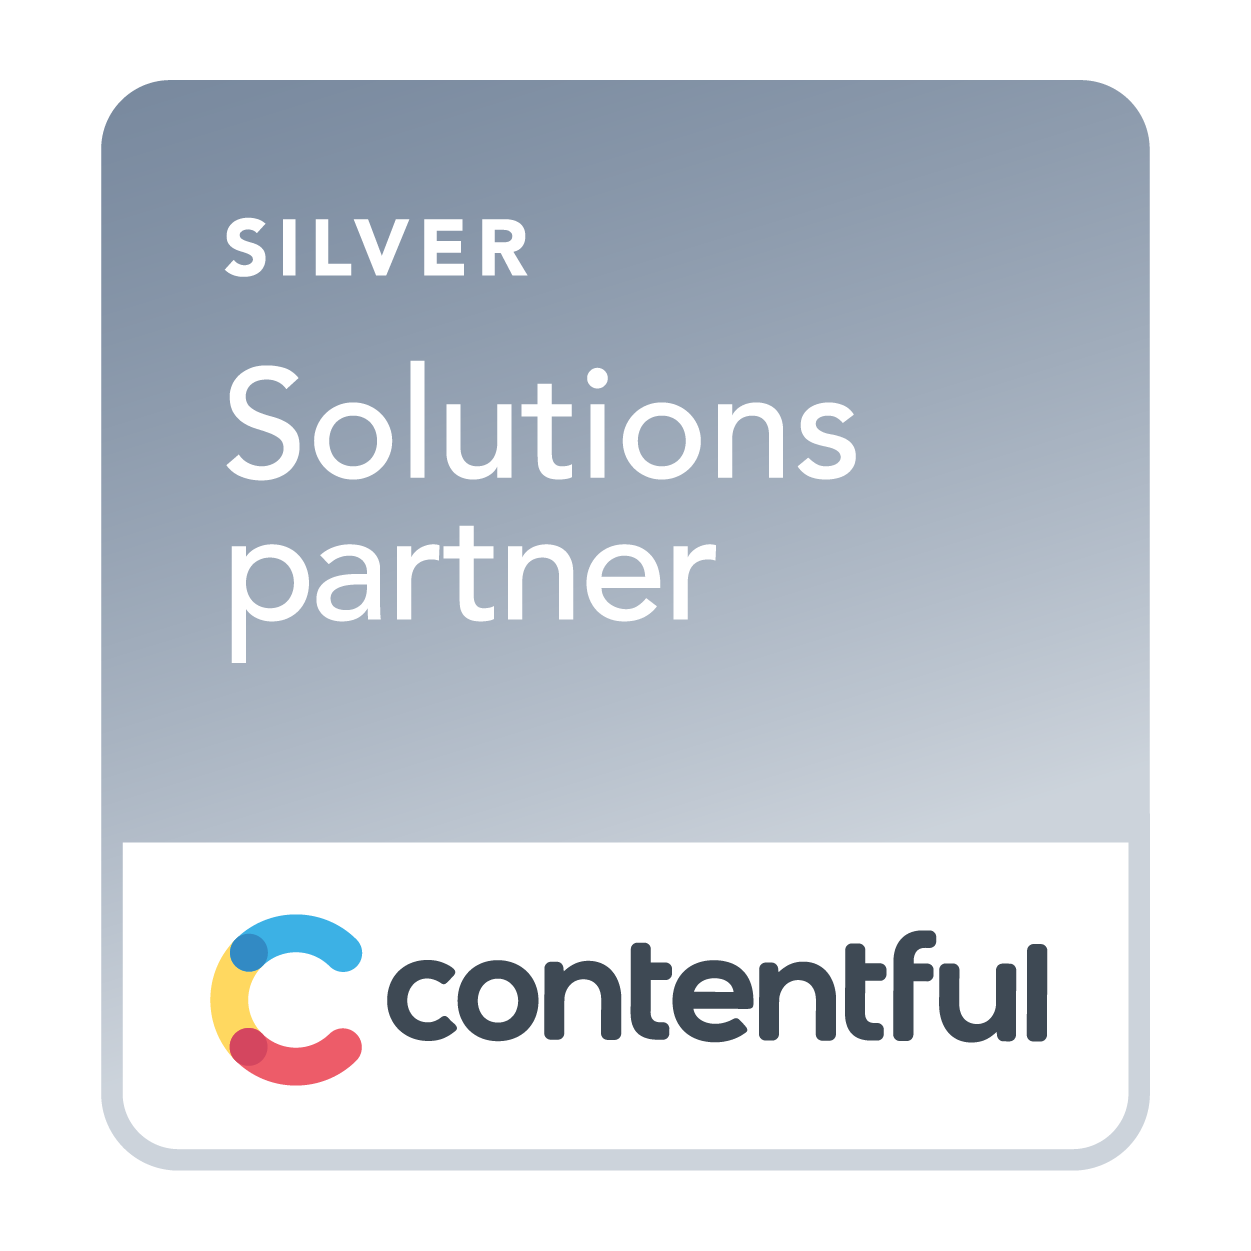 Contentful Silver Solutions partner